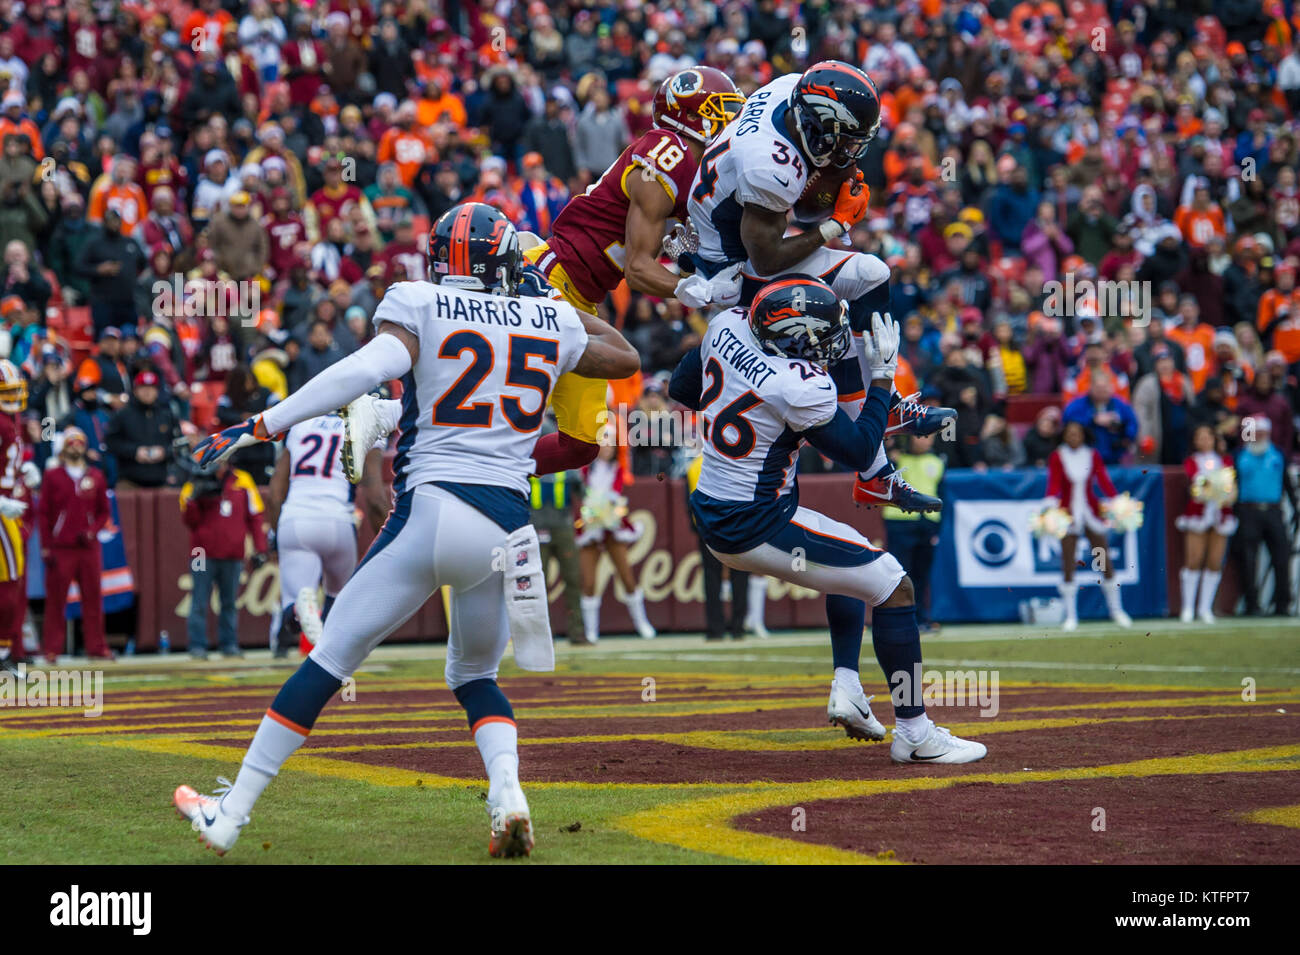 Landover, MD, USA. 24th Dec, 2017. Denver Broncos safety Will Parks (34) picks off the pass from Washington Redskins quarterback Kirk Cousins (8) in the end zone during the season ending home matchup between the Denver Broncos and the Washington Redskins at FedEx Field in Landover, MD. Credit: csm/Alamy Live News Stock Photo